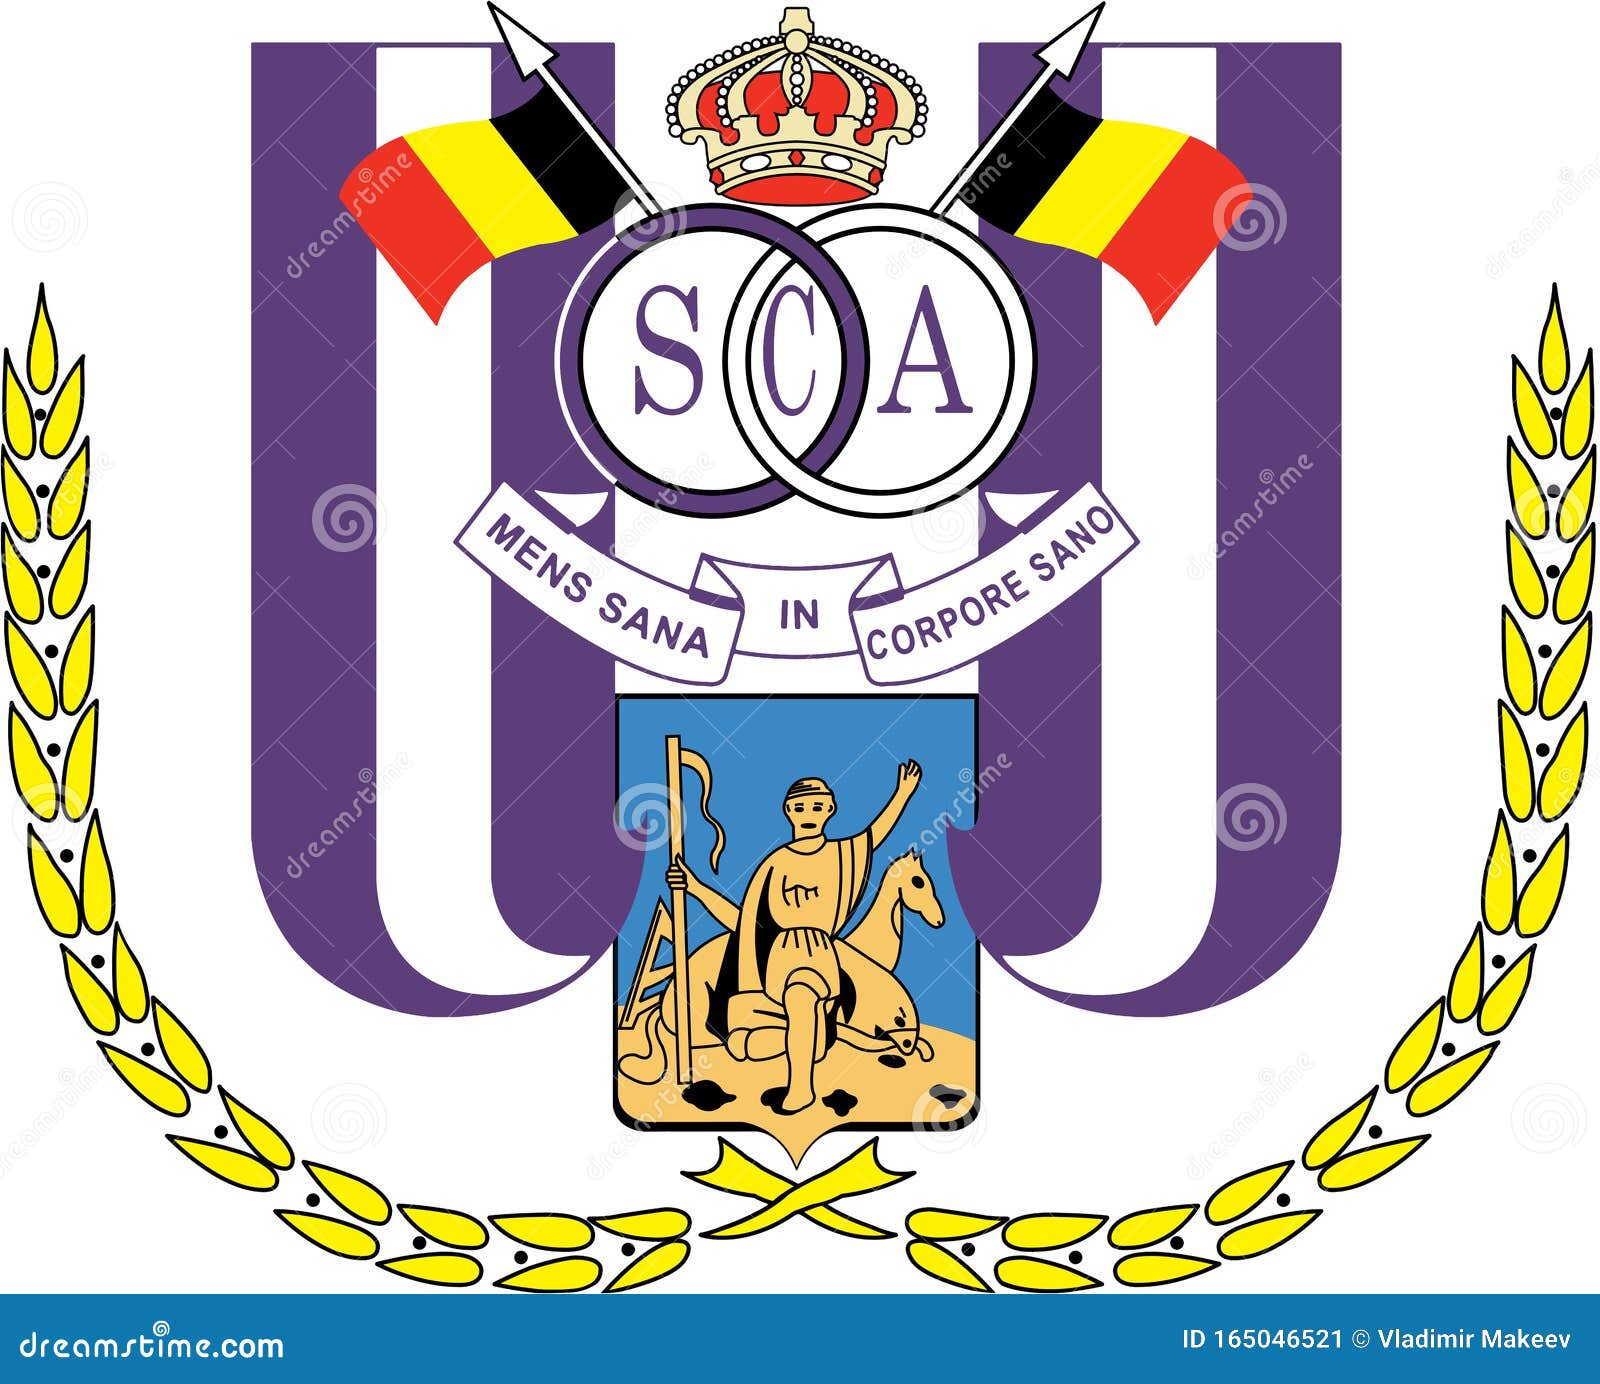 Close Up Of Waving Flag With Fc Anderlecht Football Club Logo Seamless Loop Editorial Animation Editorial Stock Photo Image Of Championship Game 124120453